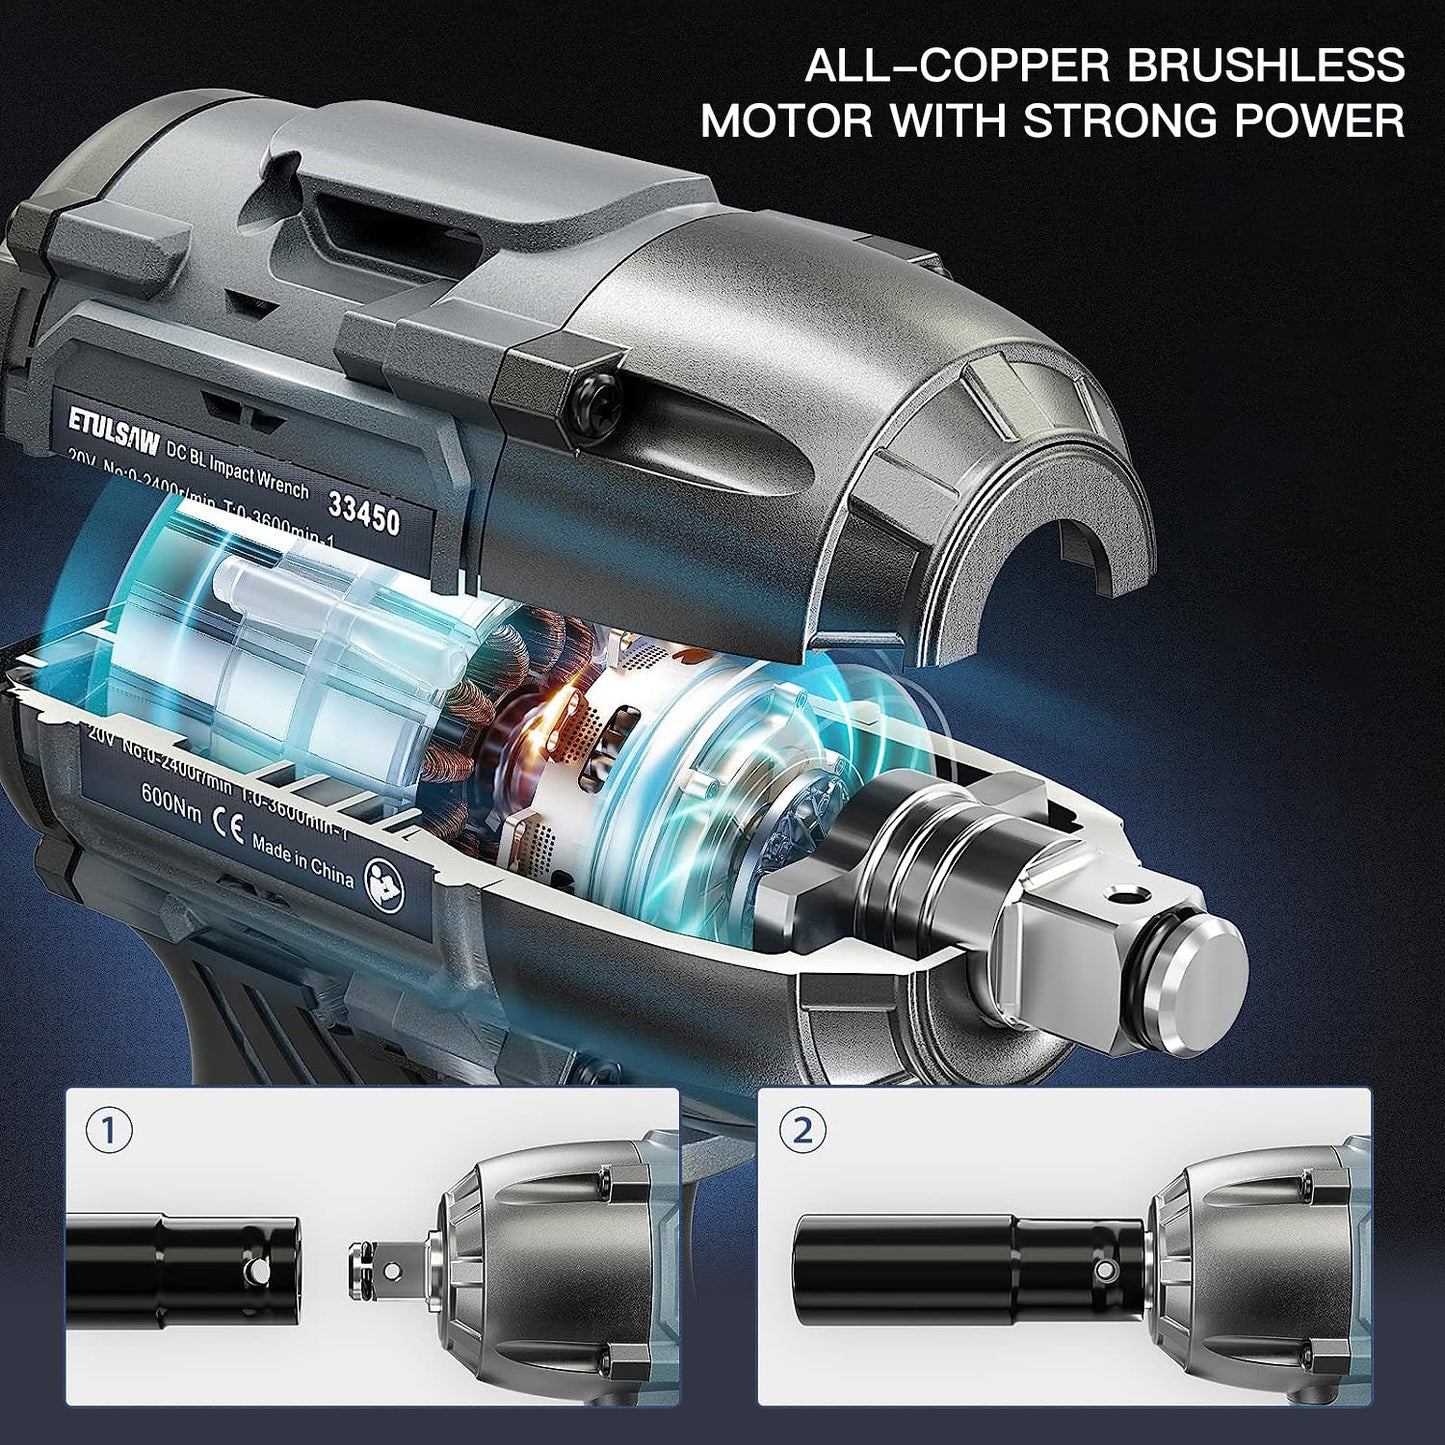 YEARTOP Powerful Cordless Impact Wrench: 1/2 inch Brushless Driver, 18V 350N.m High Torque, 6000mAh Li-Ion Battery, Variable Speed 3200rpm, Complete with Socket Set and Carry Box.